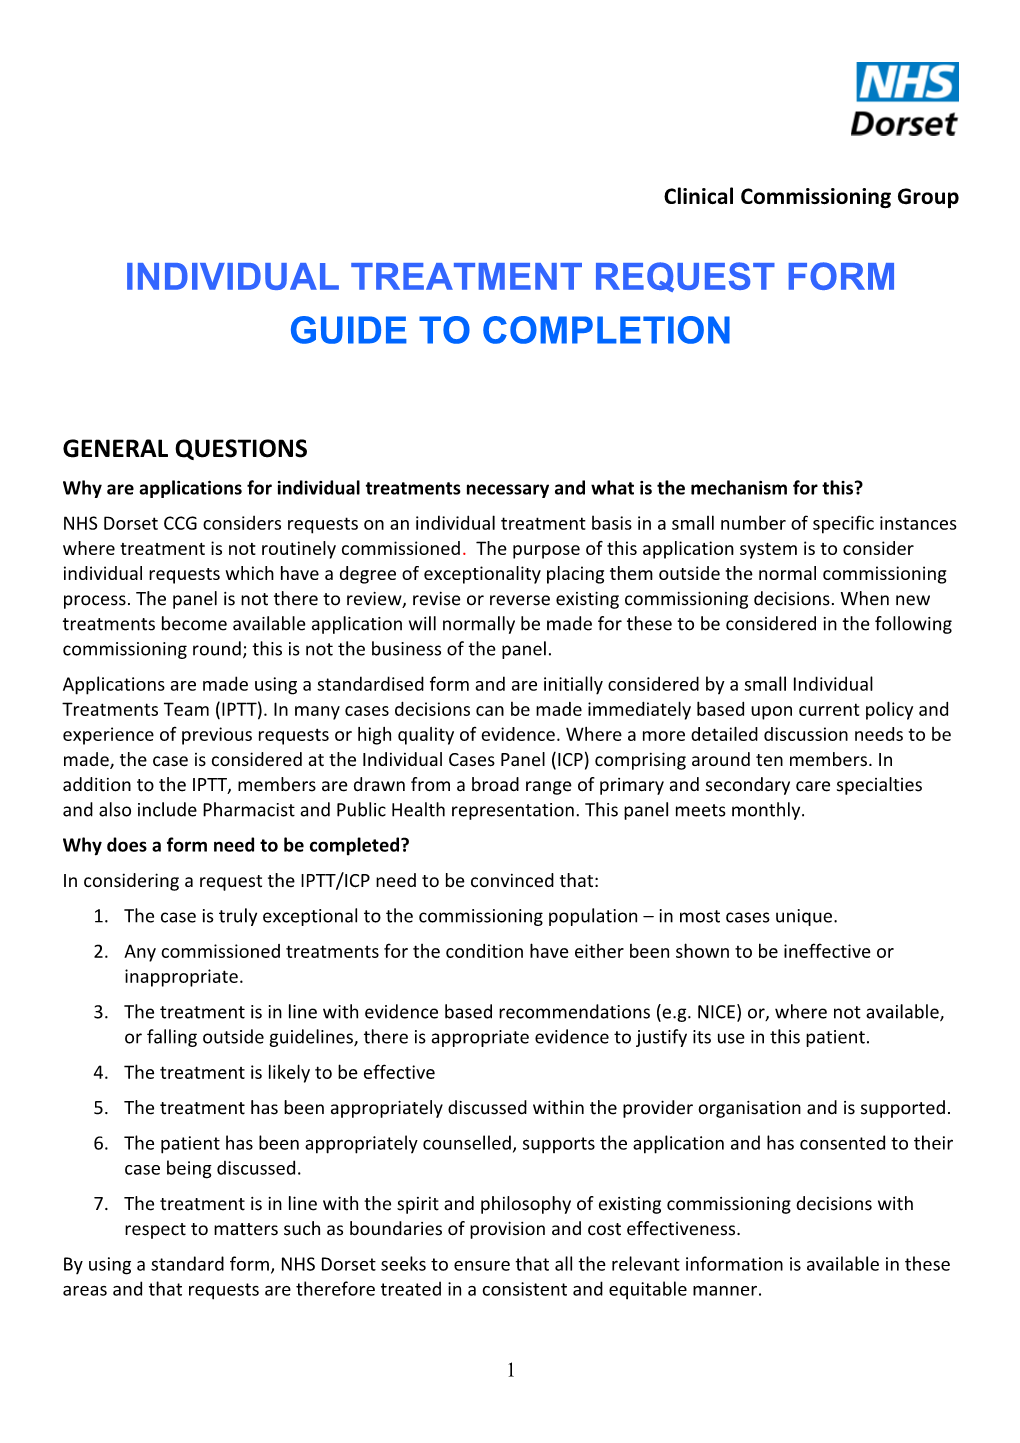 Individual Treatment Request Form